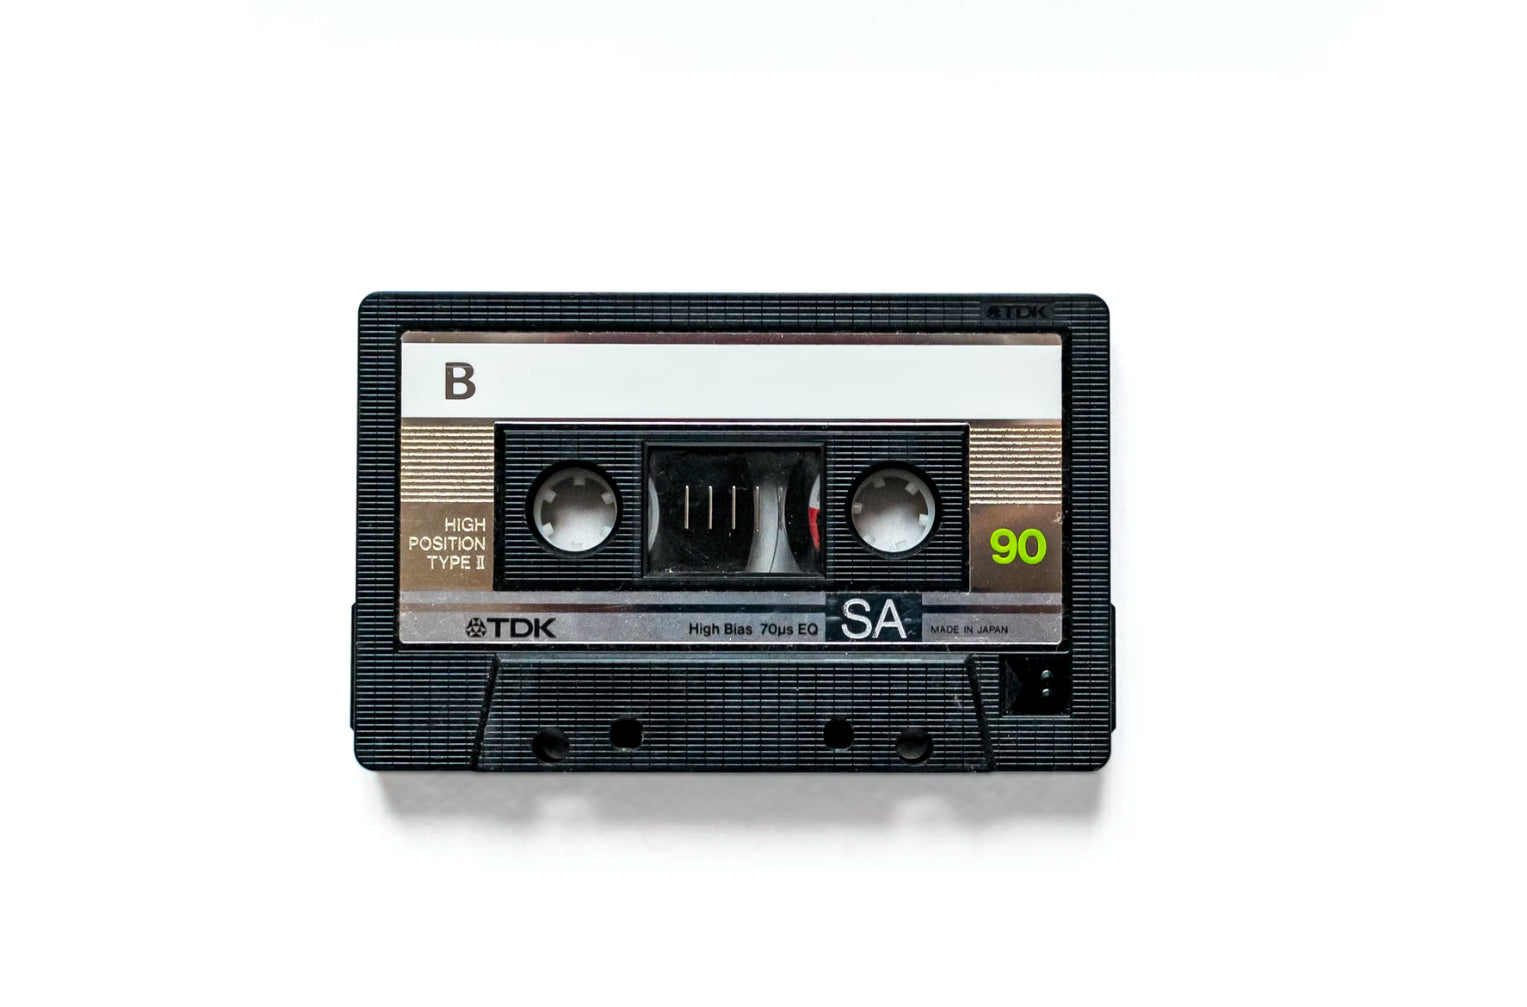 Which Is Older 8 Track or Cassette? – Legacybox